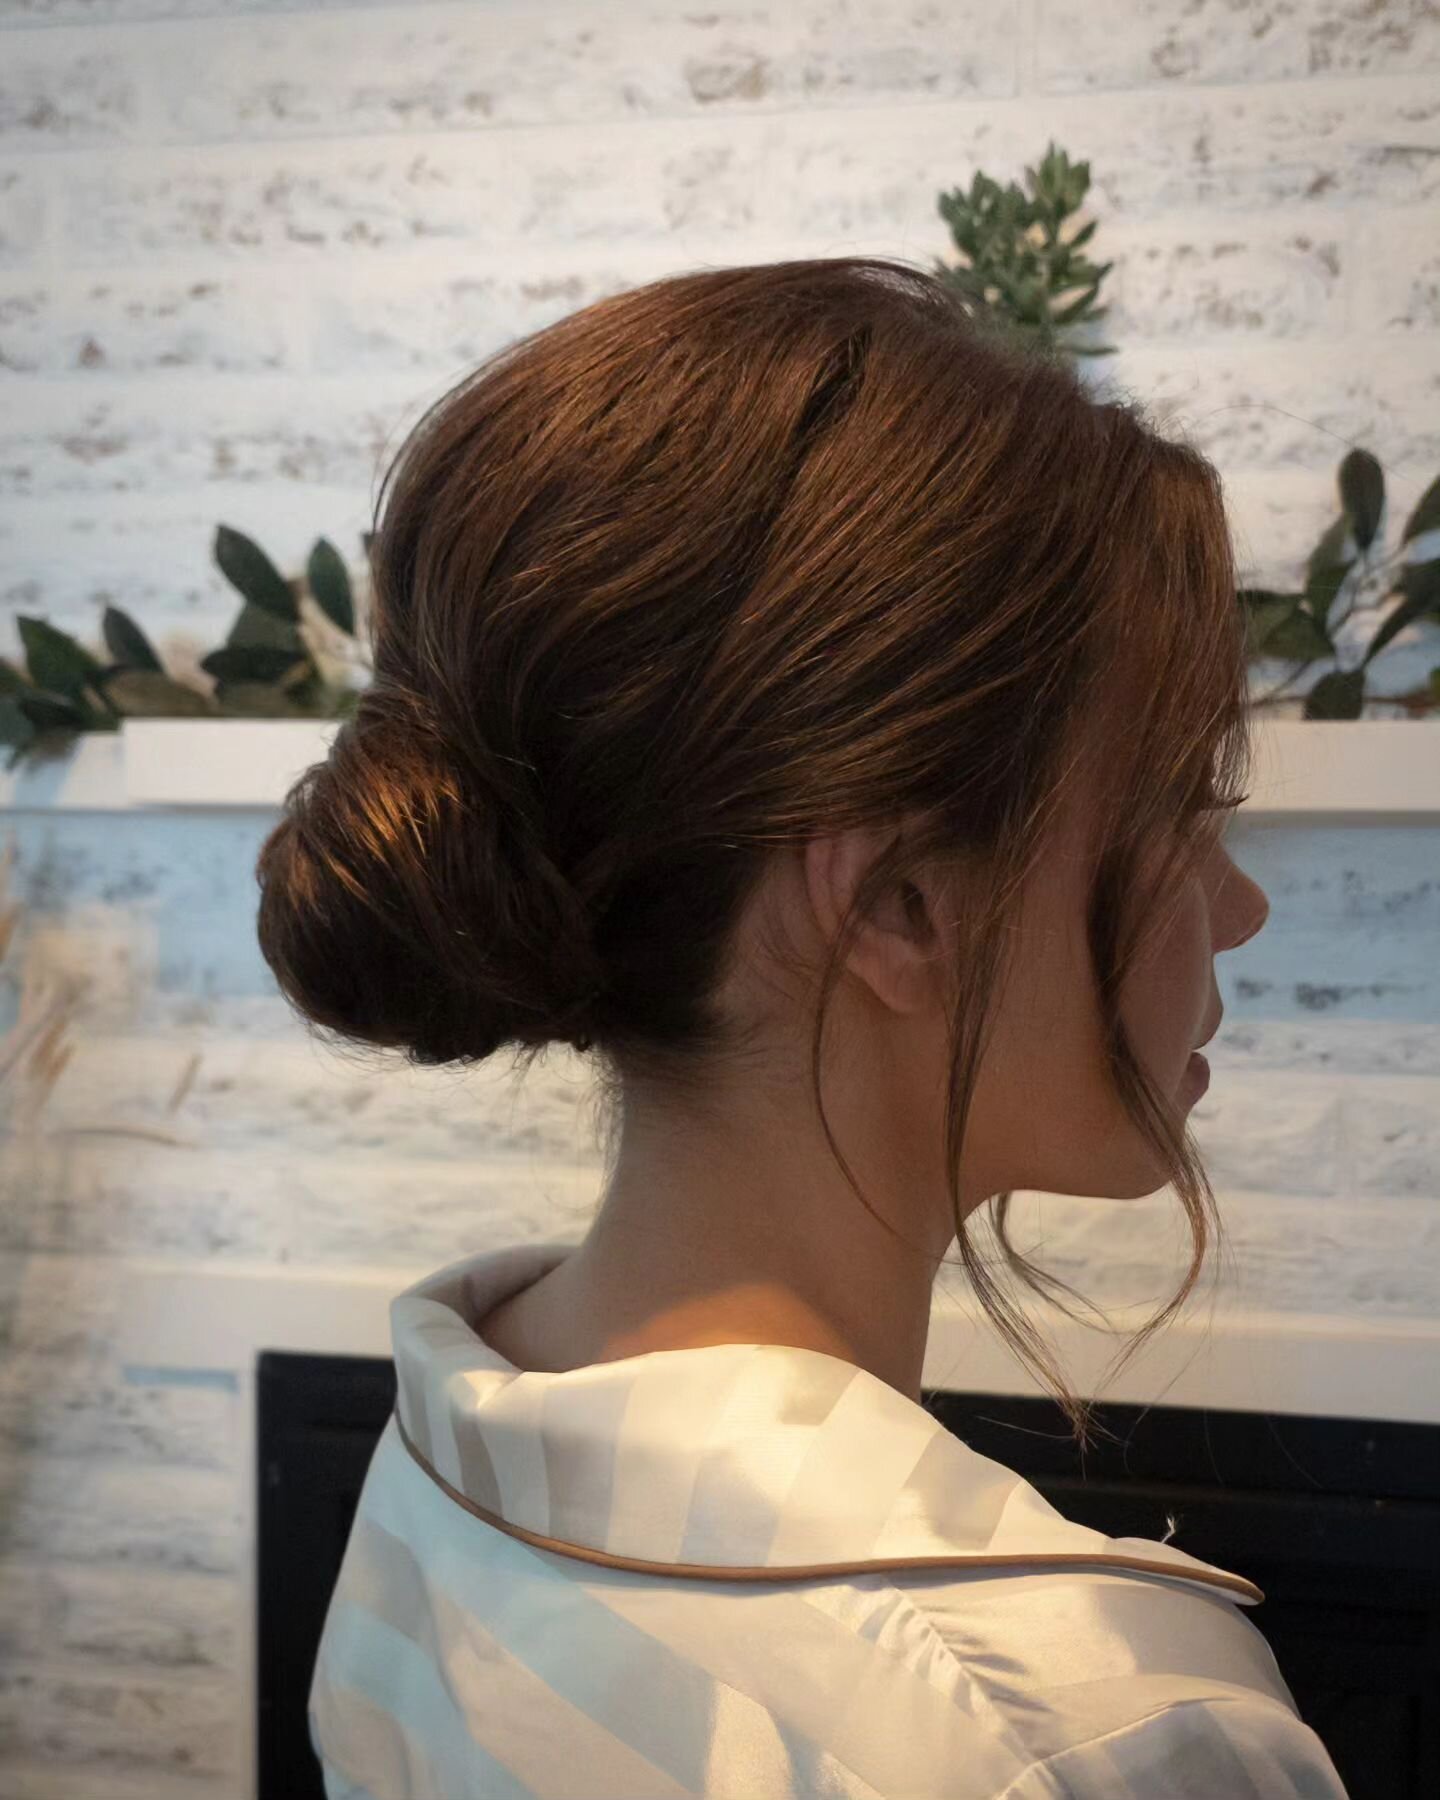 Timeless wedding hair💍

CURRENTLY BOOKING FOR 2024..get your date in the books before its too late ⏰️

Hairstyle done by Nicole 
&bull;
&bull;
&bull;
#wedding #weddinghairstyle #weddinghair #mankatostylist #minnesotastylist #mankatosalon #minnesotas